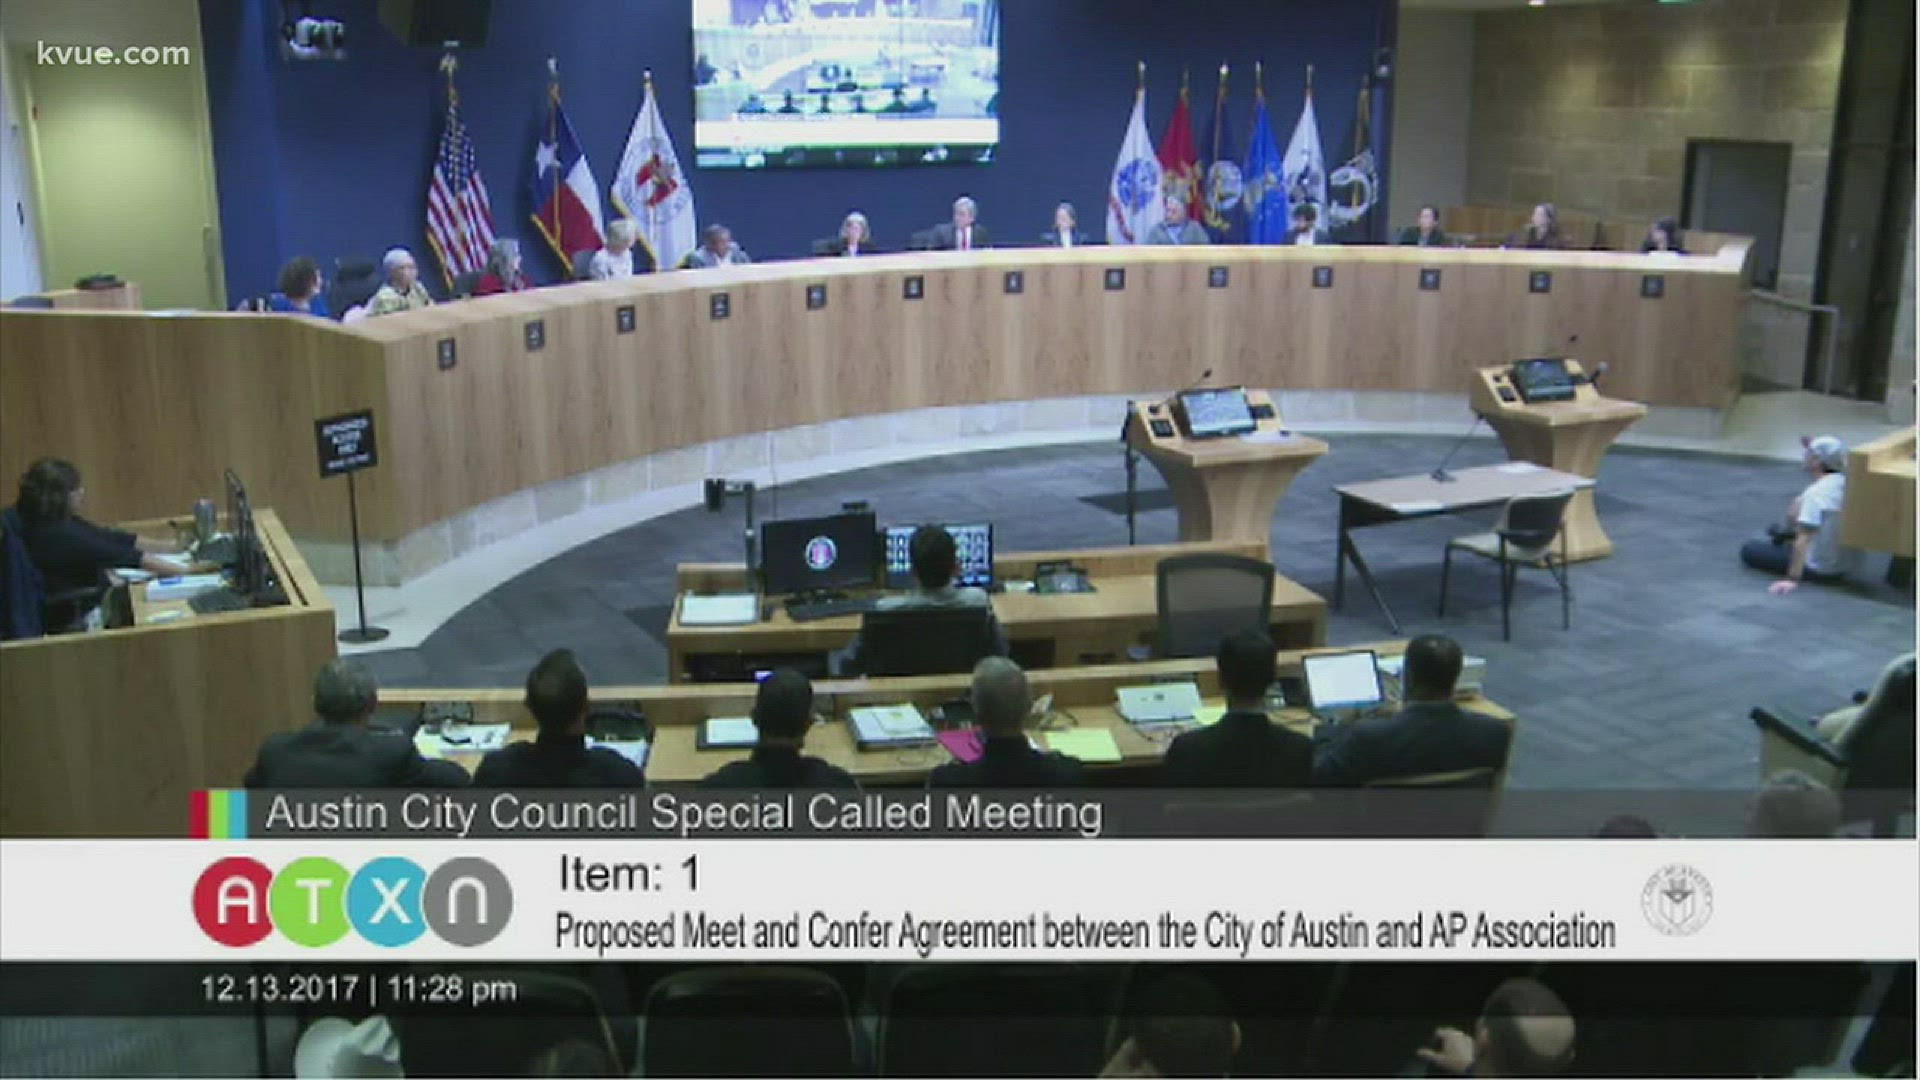 The Austin City Council delayed a vote on a new labor contract for the Austin Police Department after a special meeting Wednesday night.